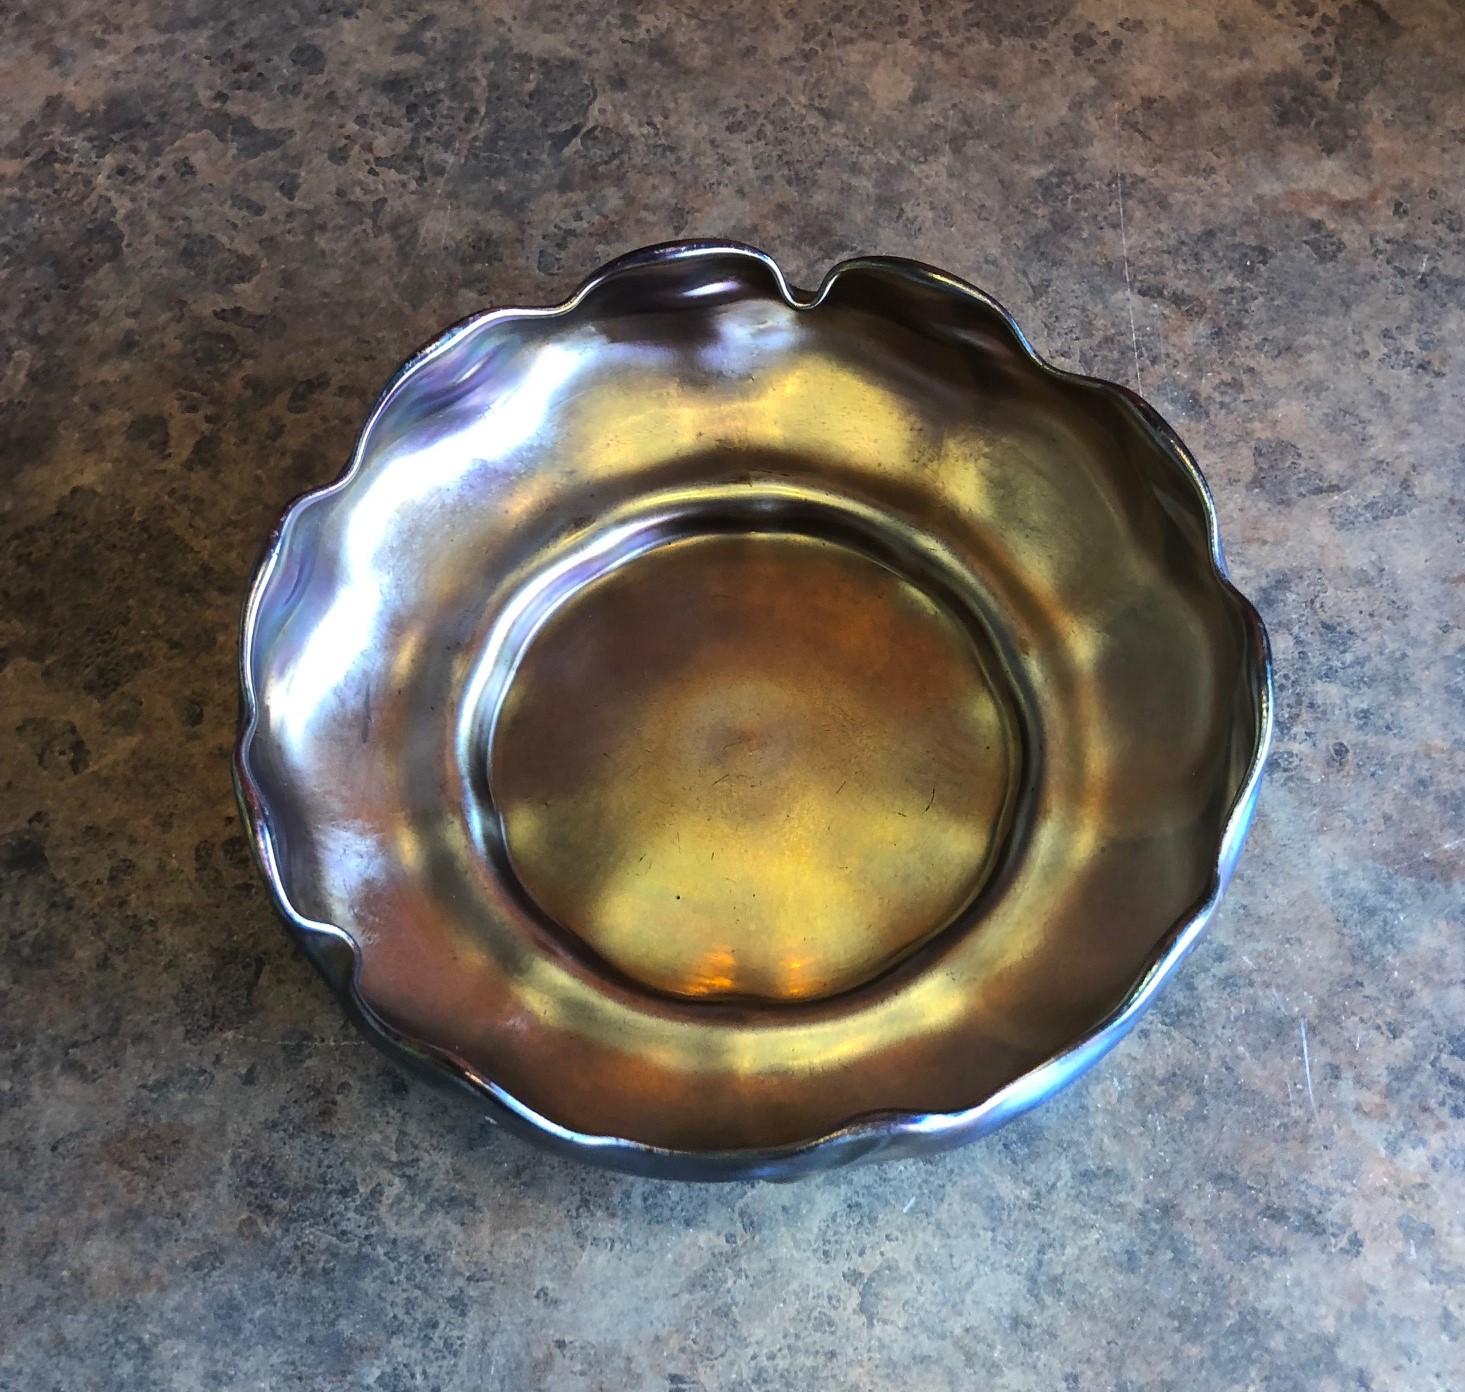 Gold iridescent favrile glass bowl from Tiffany & Co. with scalloped edges, circa early 20th century.

The bowl is 6